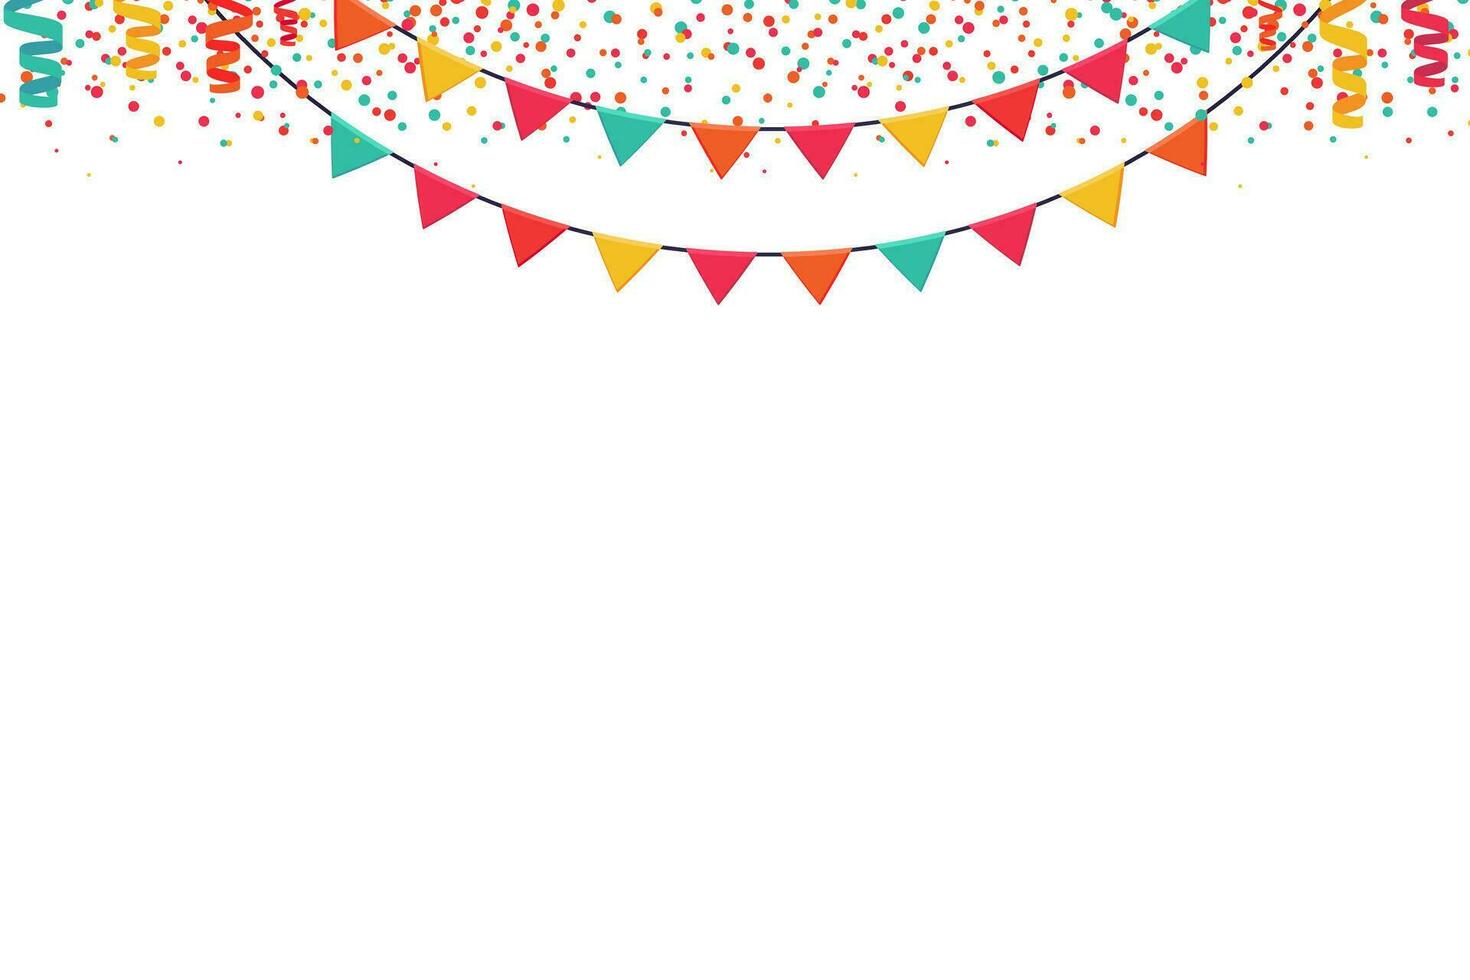 Garland of colored flags and confetti horizontal banner. Carnival garlands entertainment events. Festive vector background in flat cartoon style on a white background